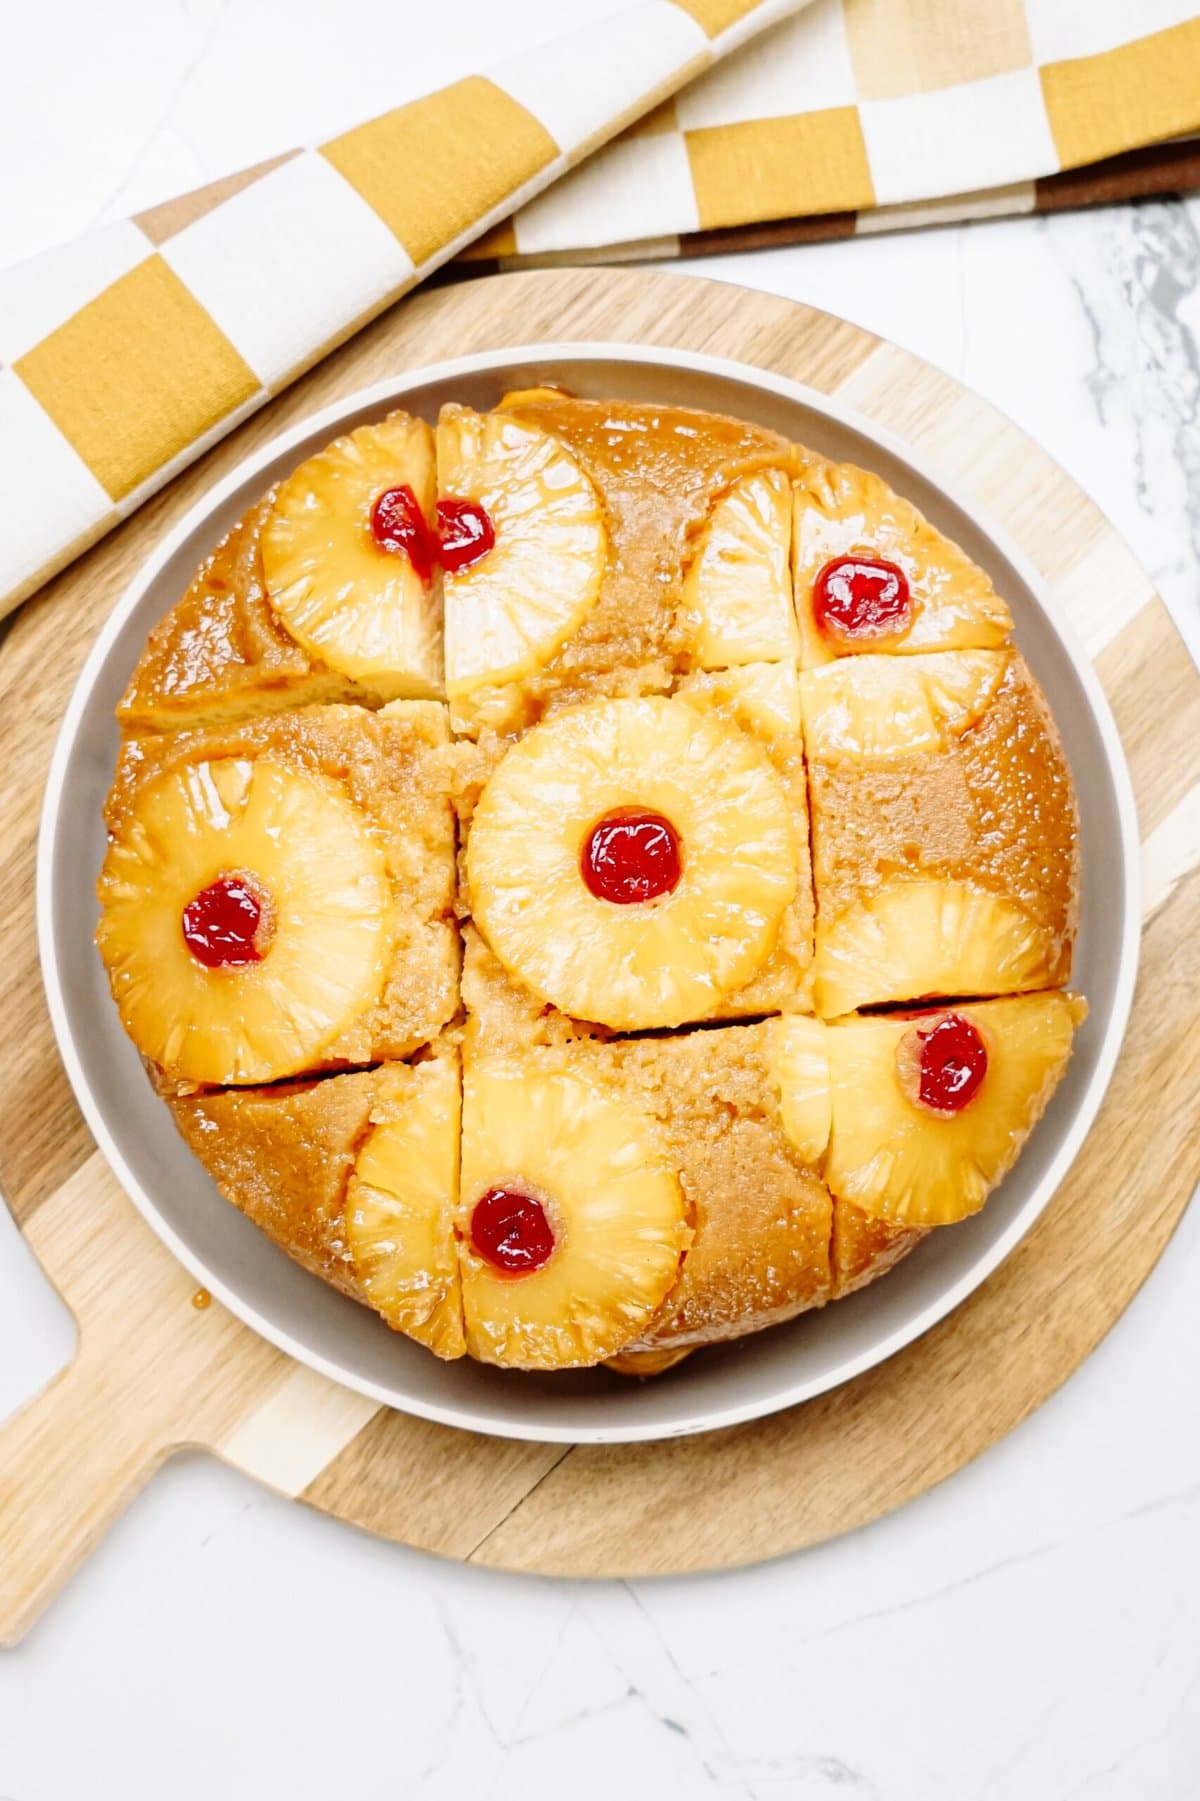 A pineapple upside-down cake on a wooden serving board, garnished with pineapple rings and maraschino cherries.